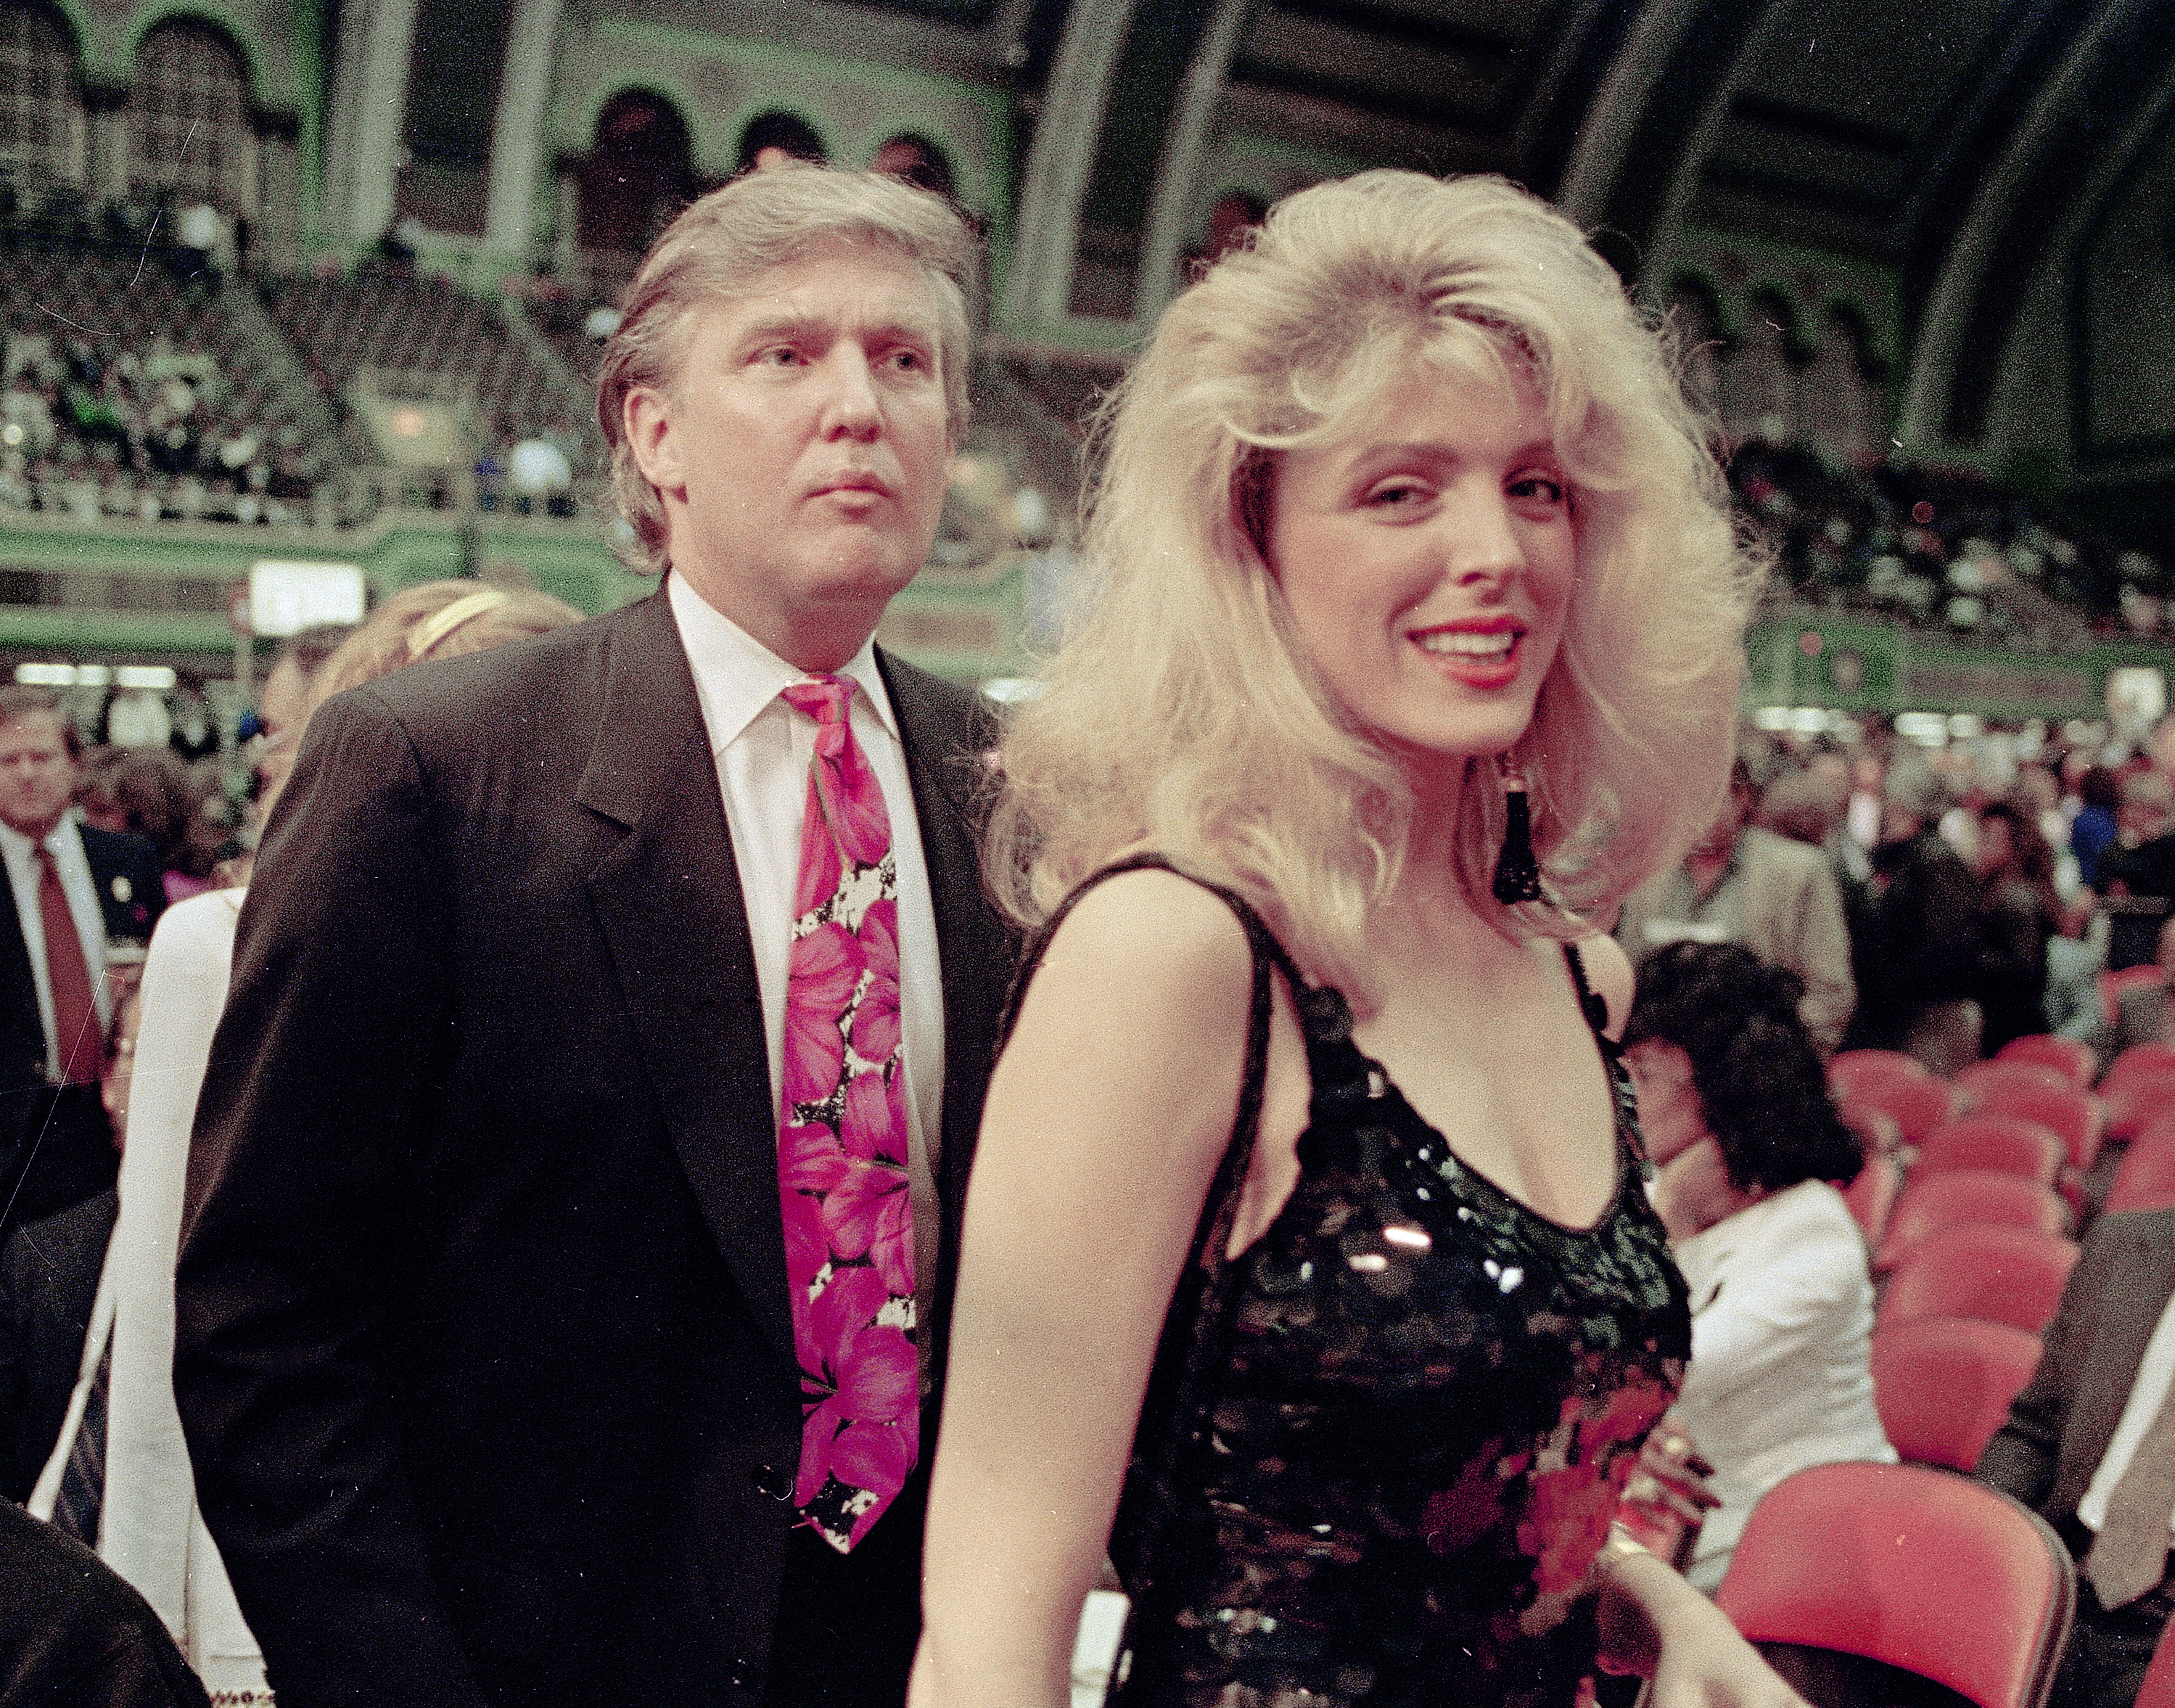 byron wist recommends donald trumps wife posing nude pic